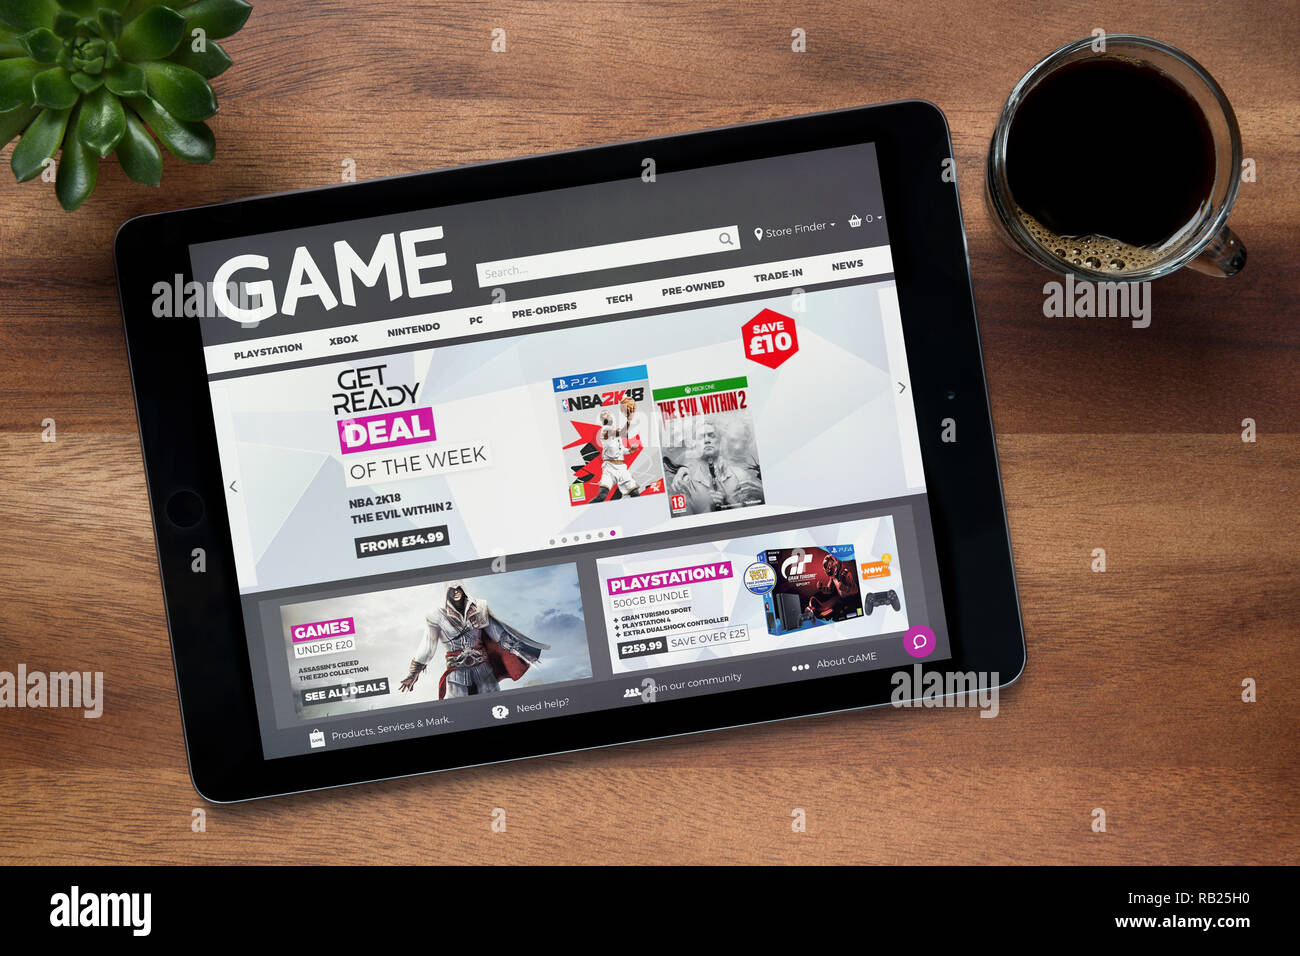 The website of Game retailer is seen on an iPad tablet, on a wooden table along with an espresso coffee and a house plant (Editorial use only). Stock Photo